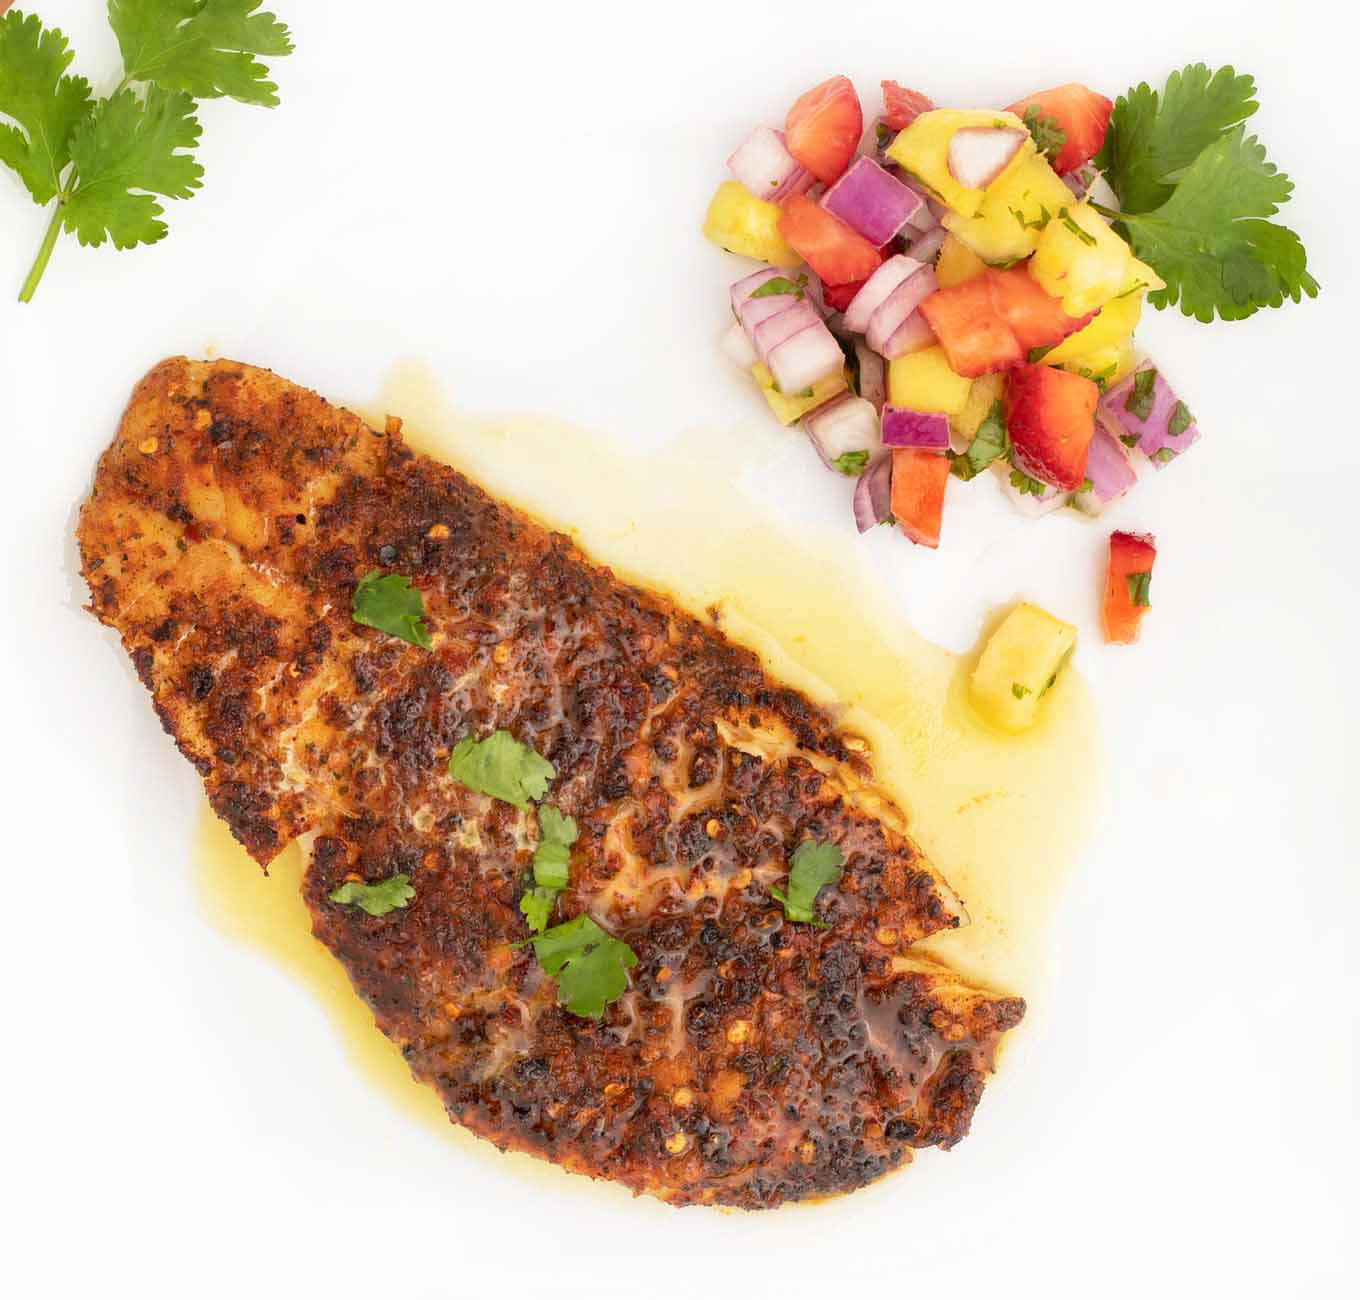 cooked cajun style florida snapper fillet with fruit salsa and lime margarita sauce on a white plate